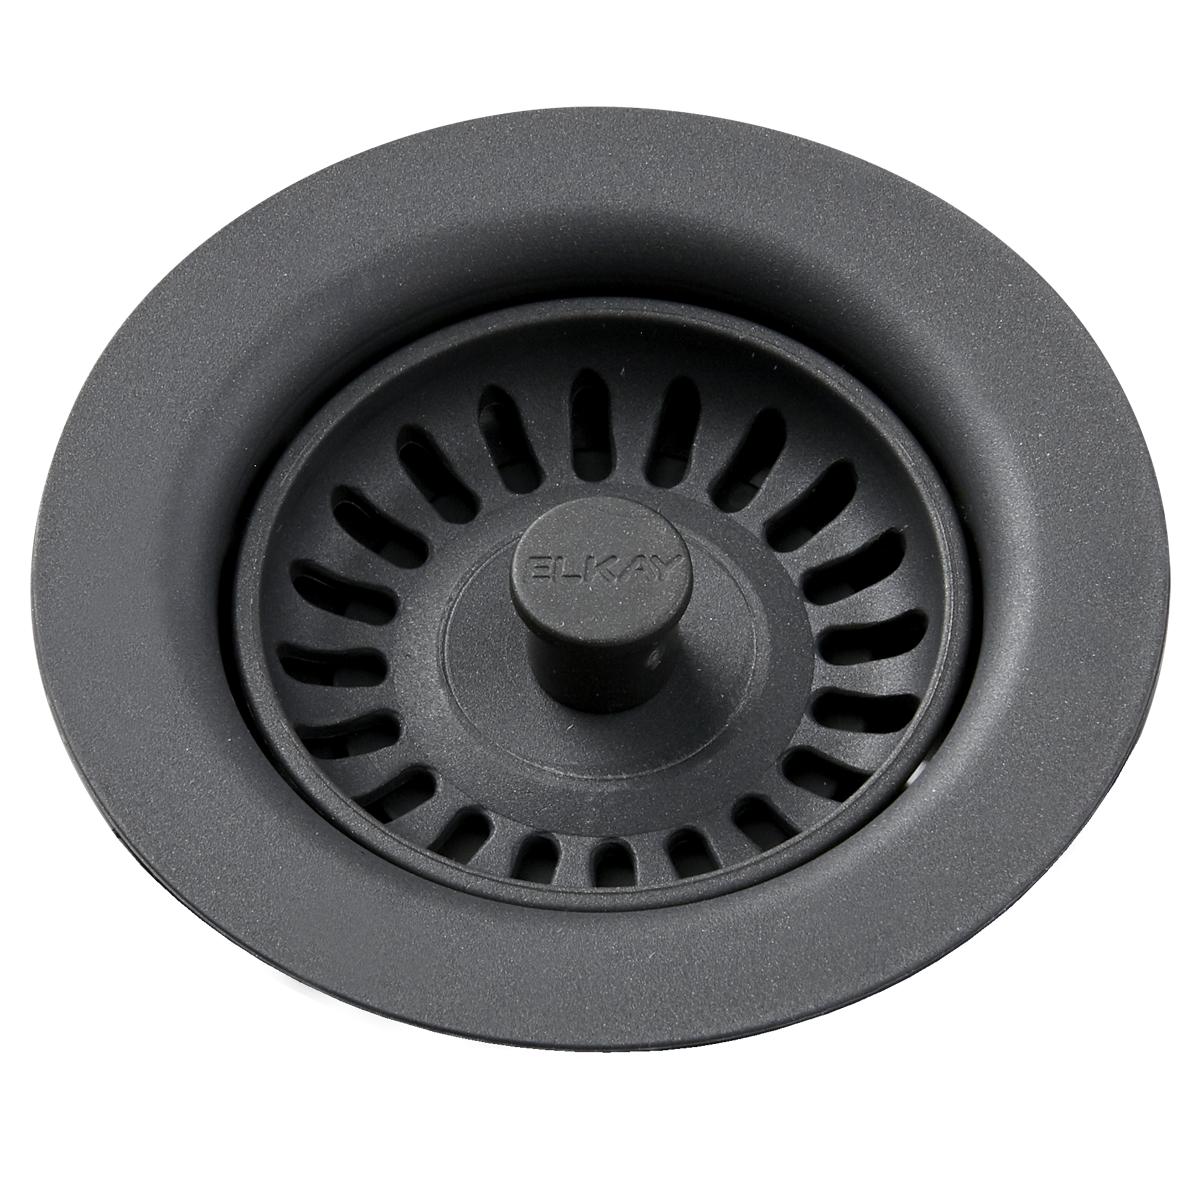 Elkay Polymer Drain Fitting with Removable Basket Strainer and Rubber Stopper